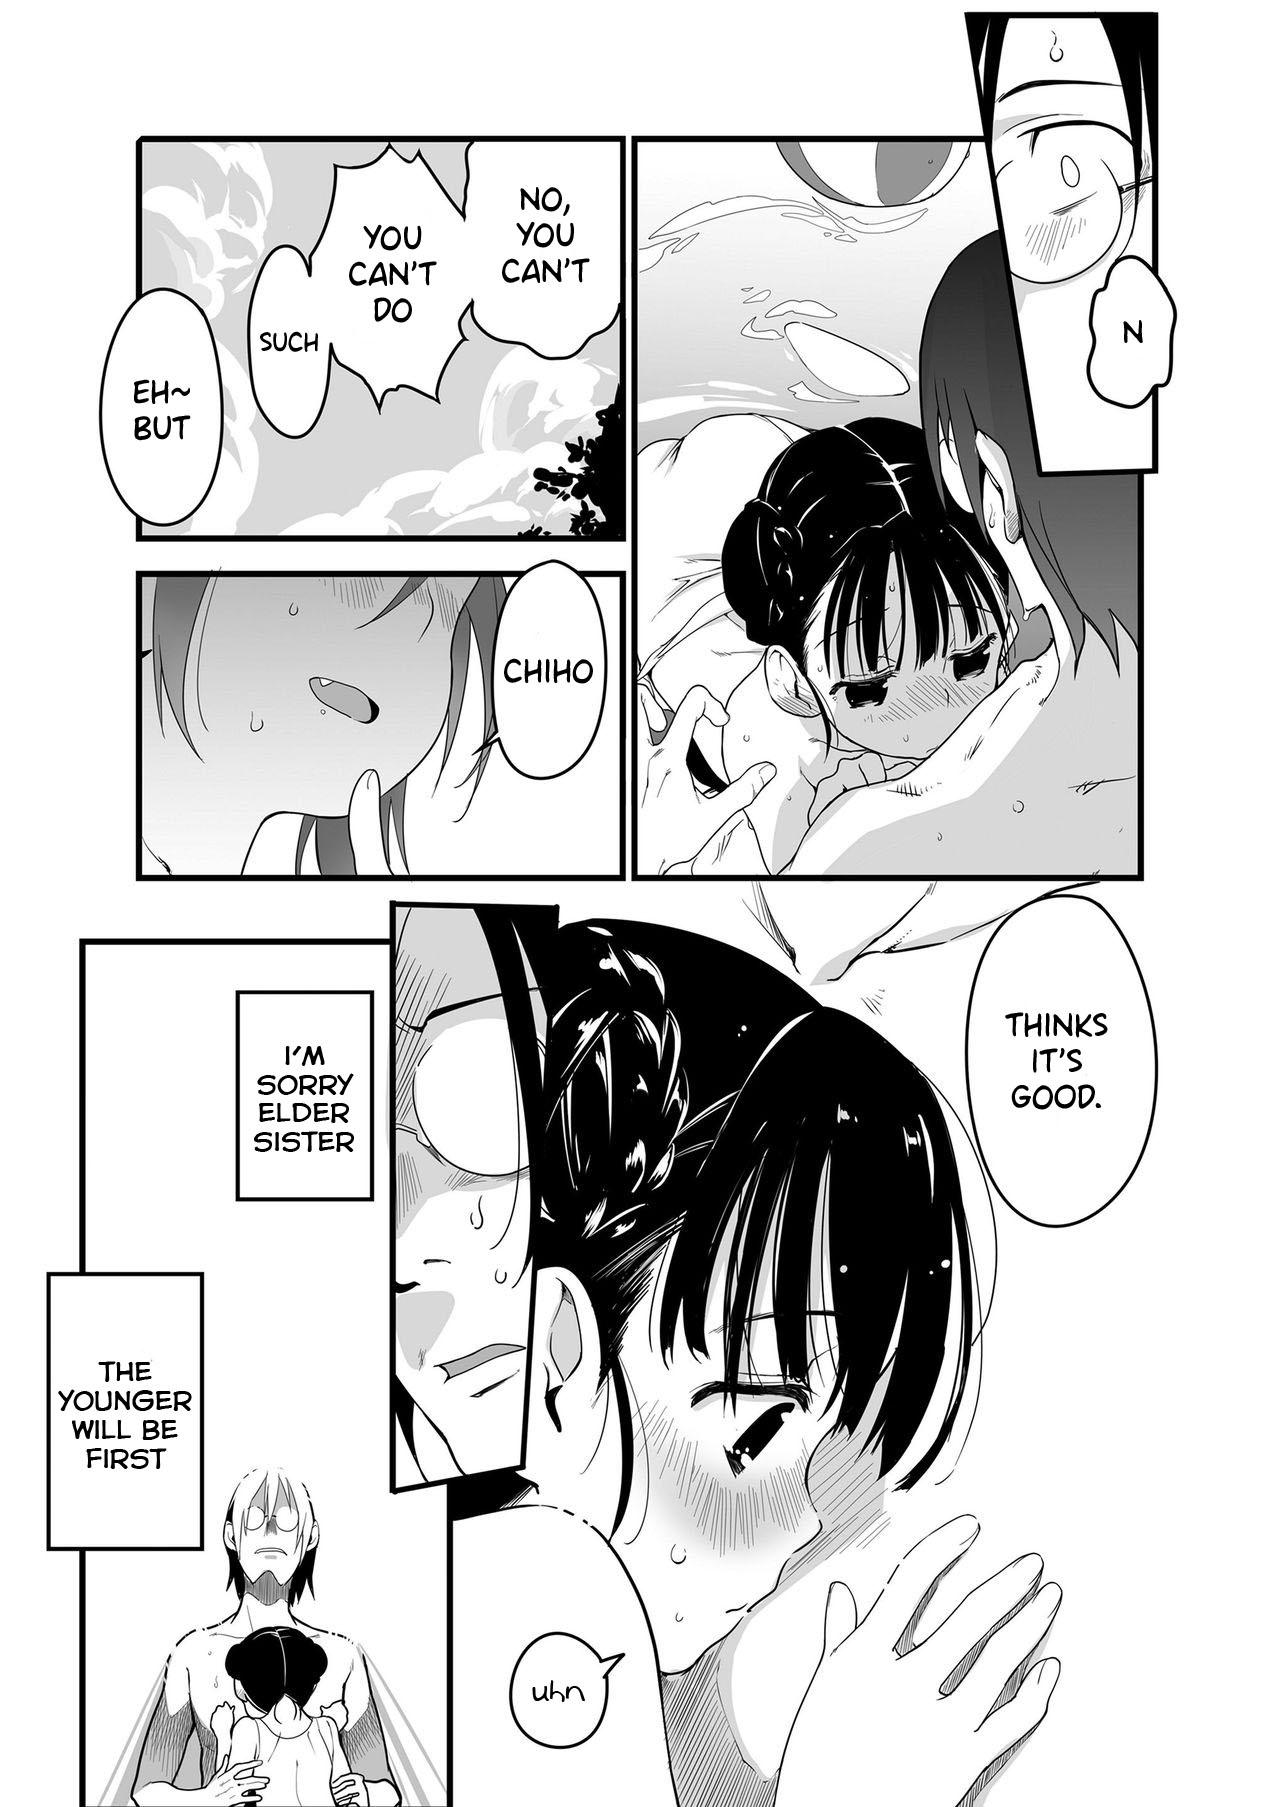 Perfect Tits Uchiage Hanabi, Ane to Miruka? Imouto to Miruka? | Fireworks, Should we see it with the elder sister or the younger sister? Gay Longhair - Page 9